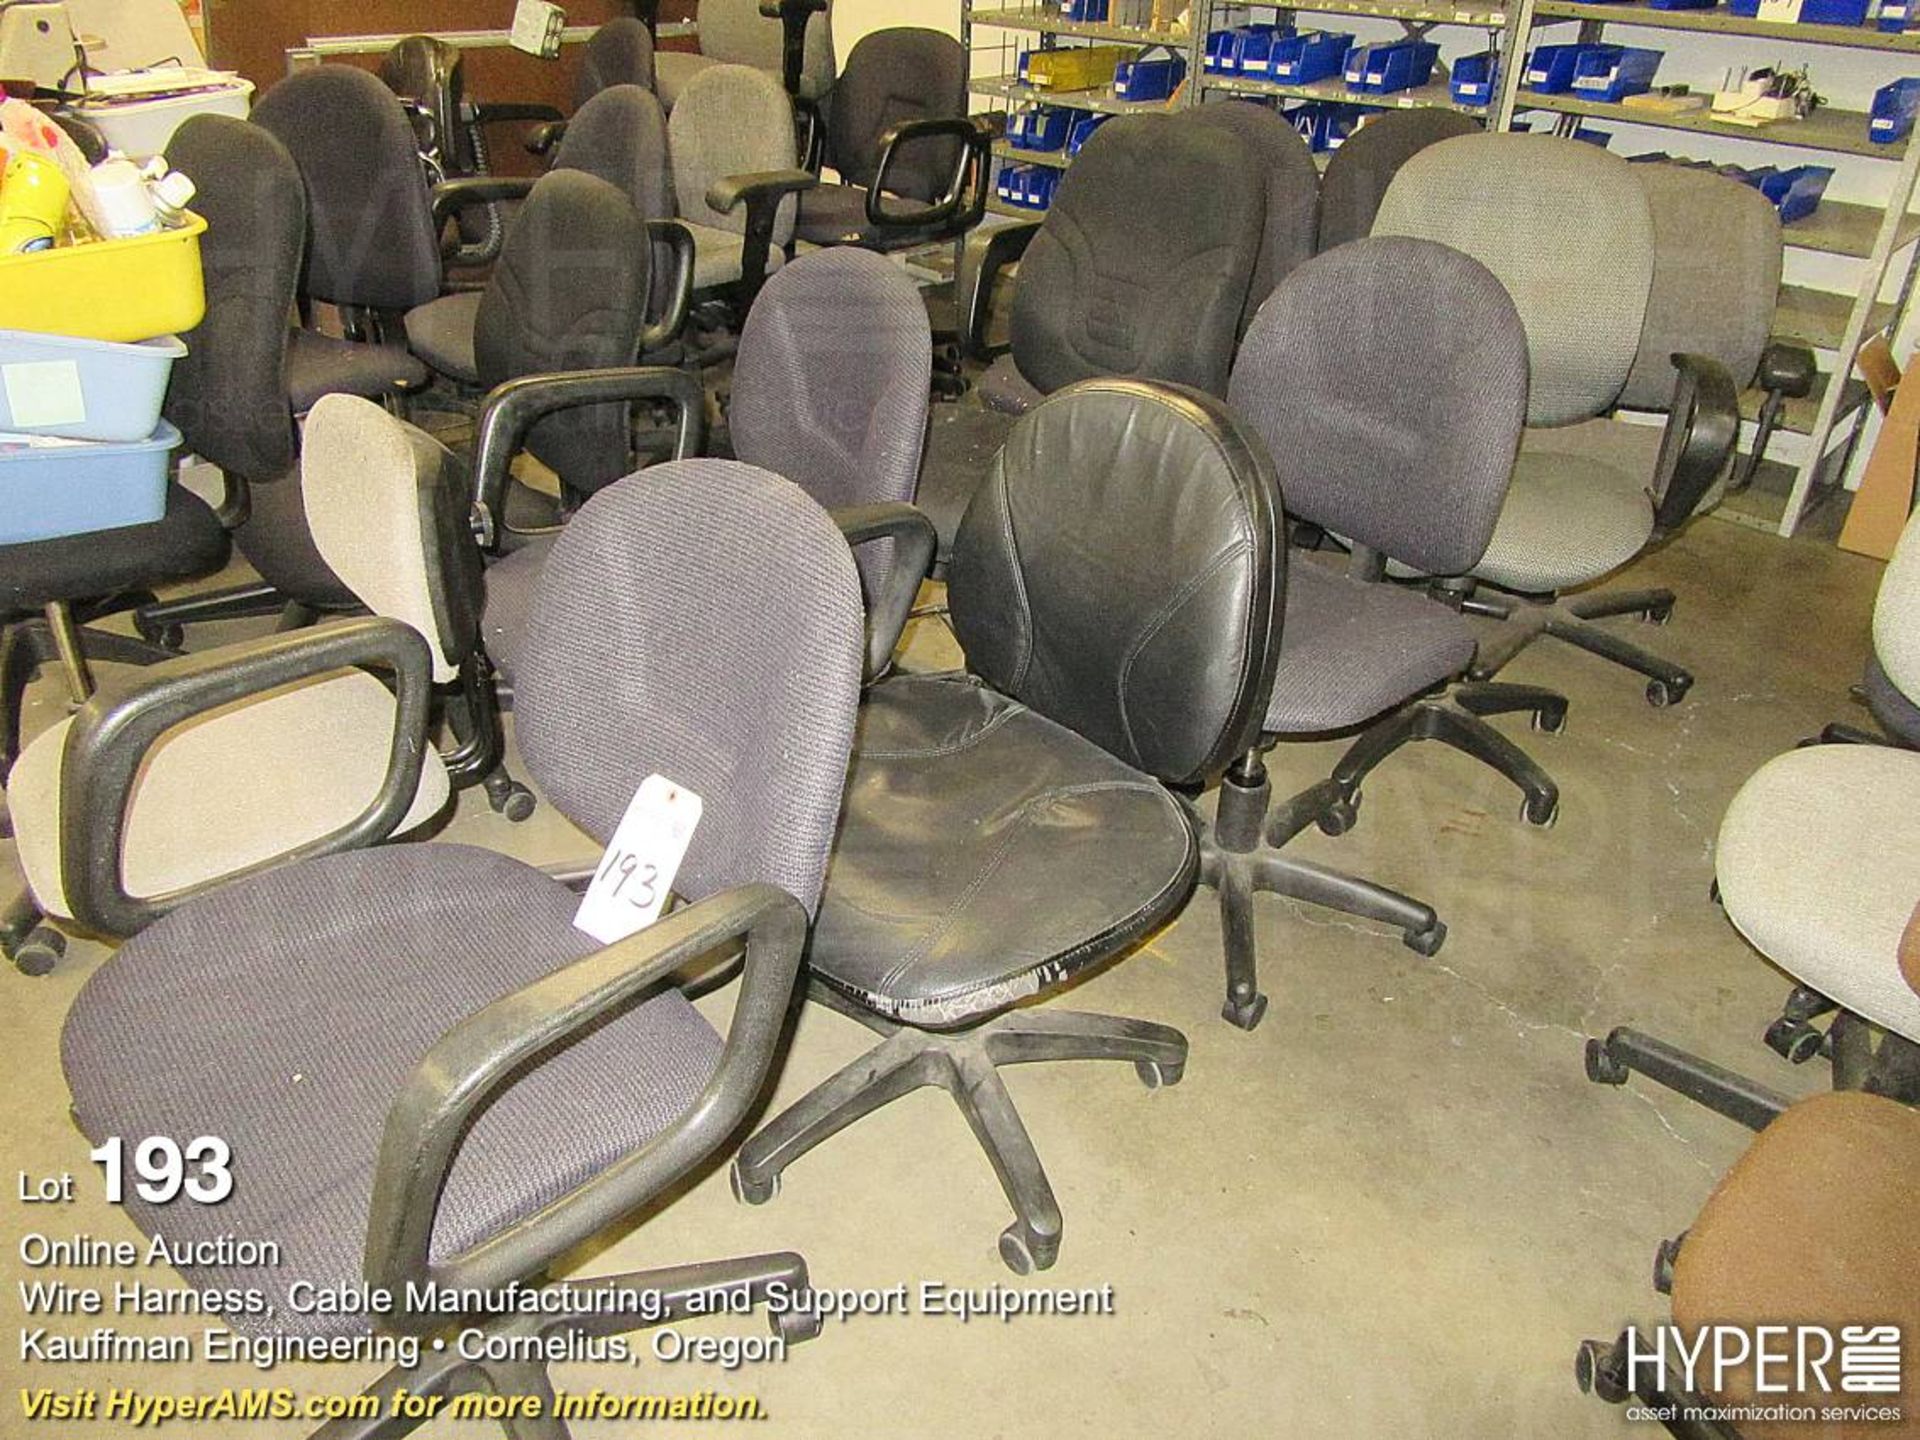 Assorted office chairs on casters.